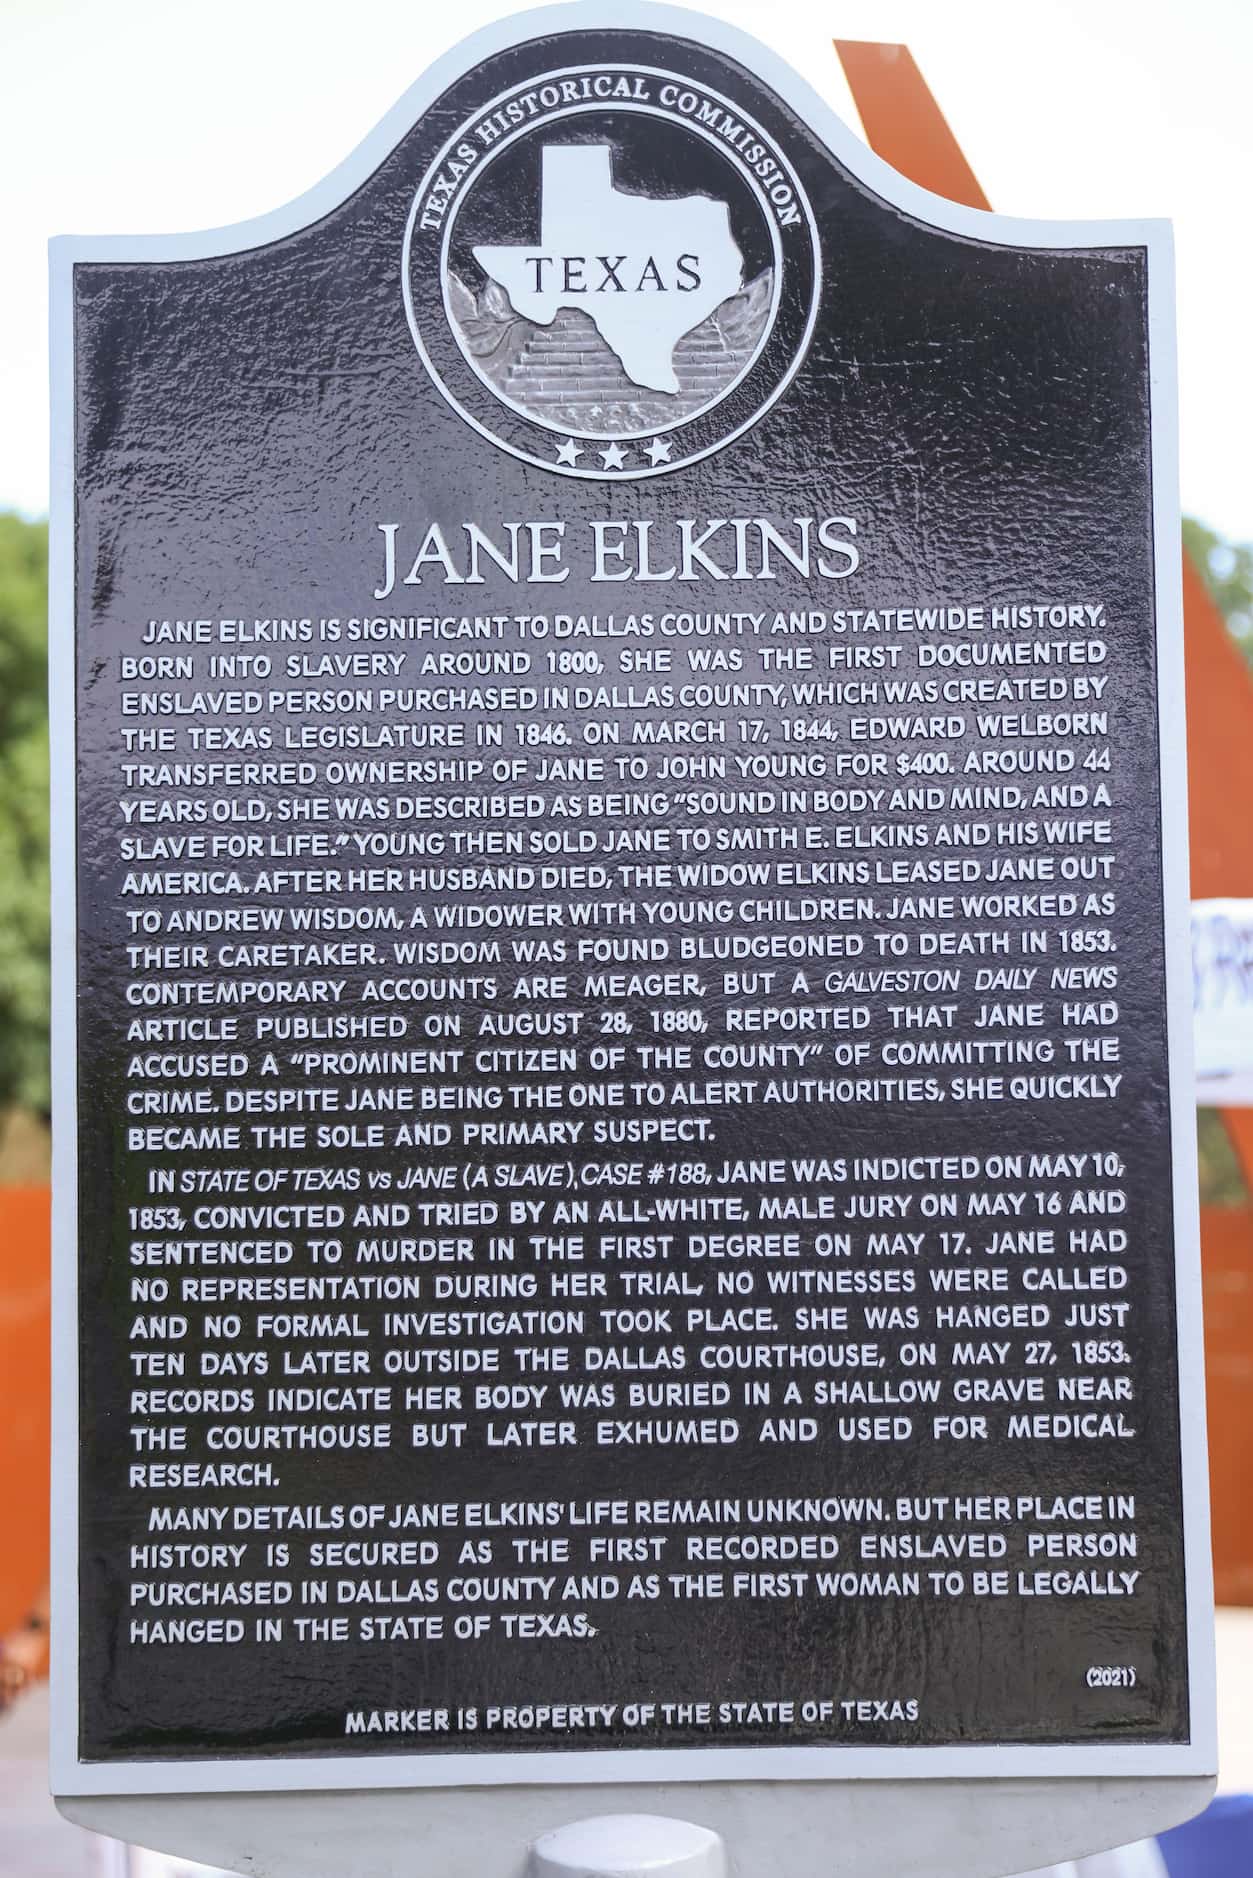 One historical marker was dedicated to Jane Elkins, who was the first documented enslaved...